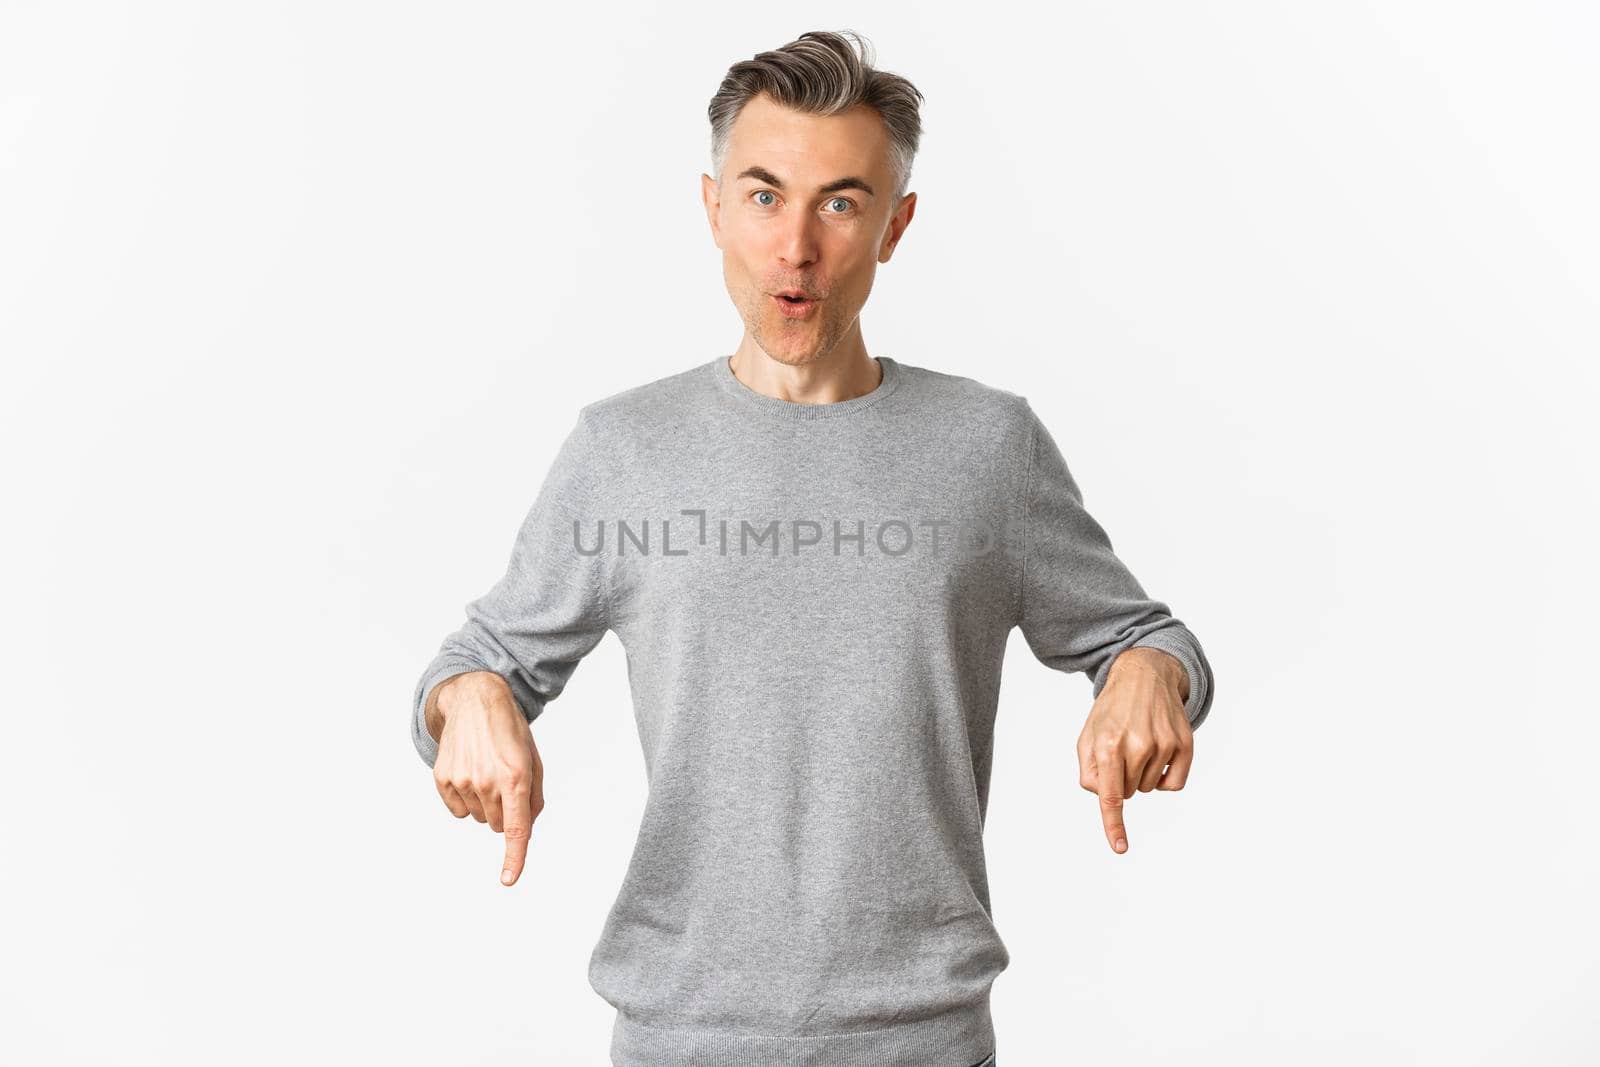 Surprised handsome middle-aged guy in grey sweater asking question about product, pointing fingers down and looking amazed, standing over white background.